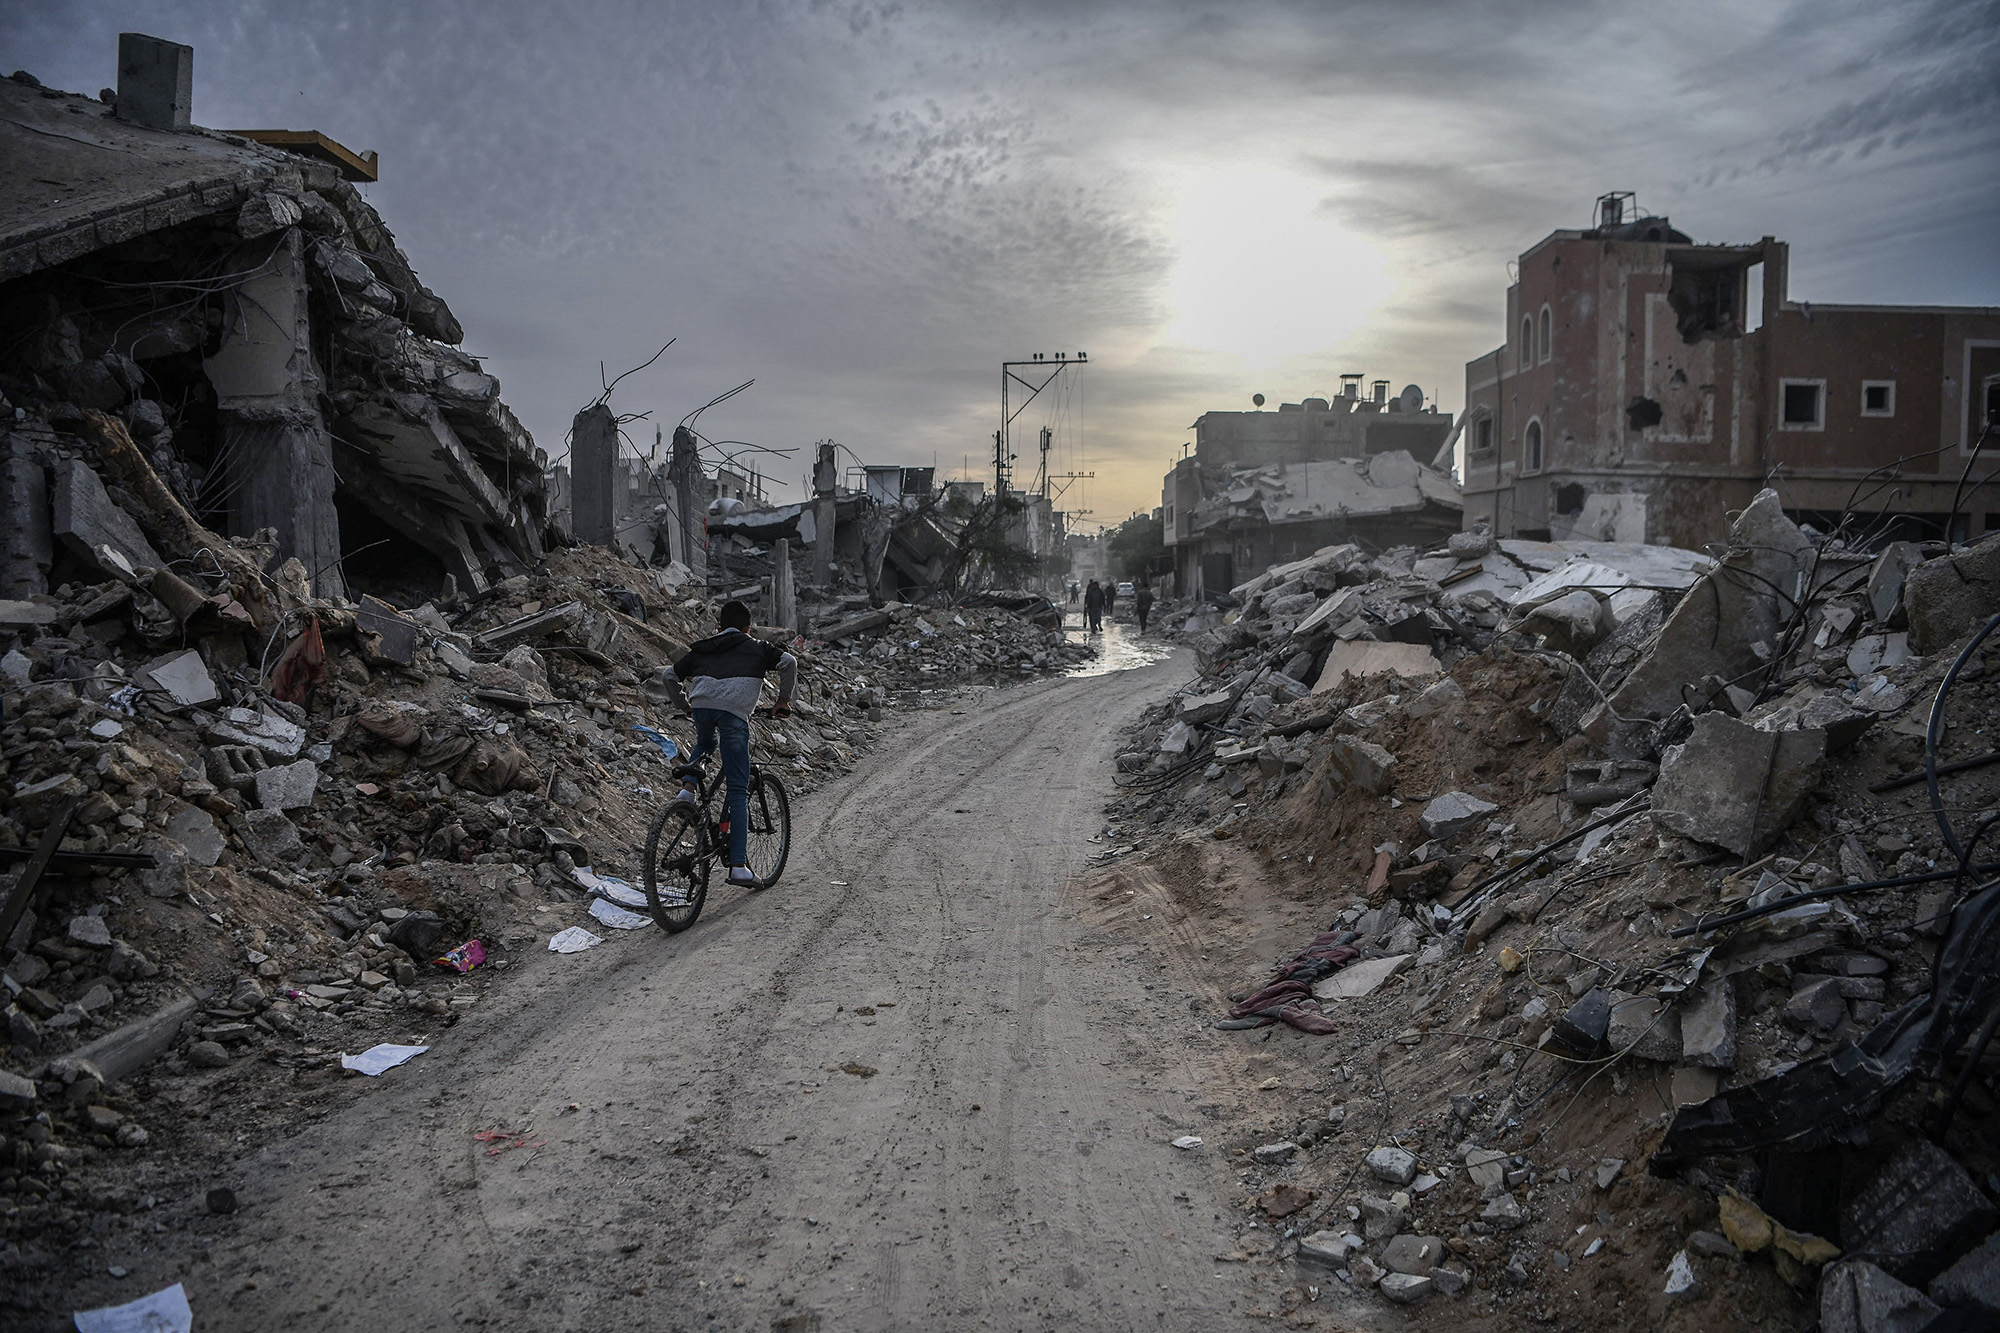 A young boy, riding a bicycle, passes through a group of destroyed houses in Gaza.